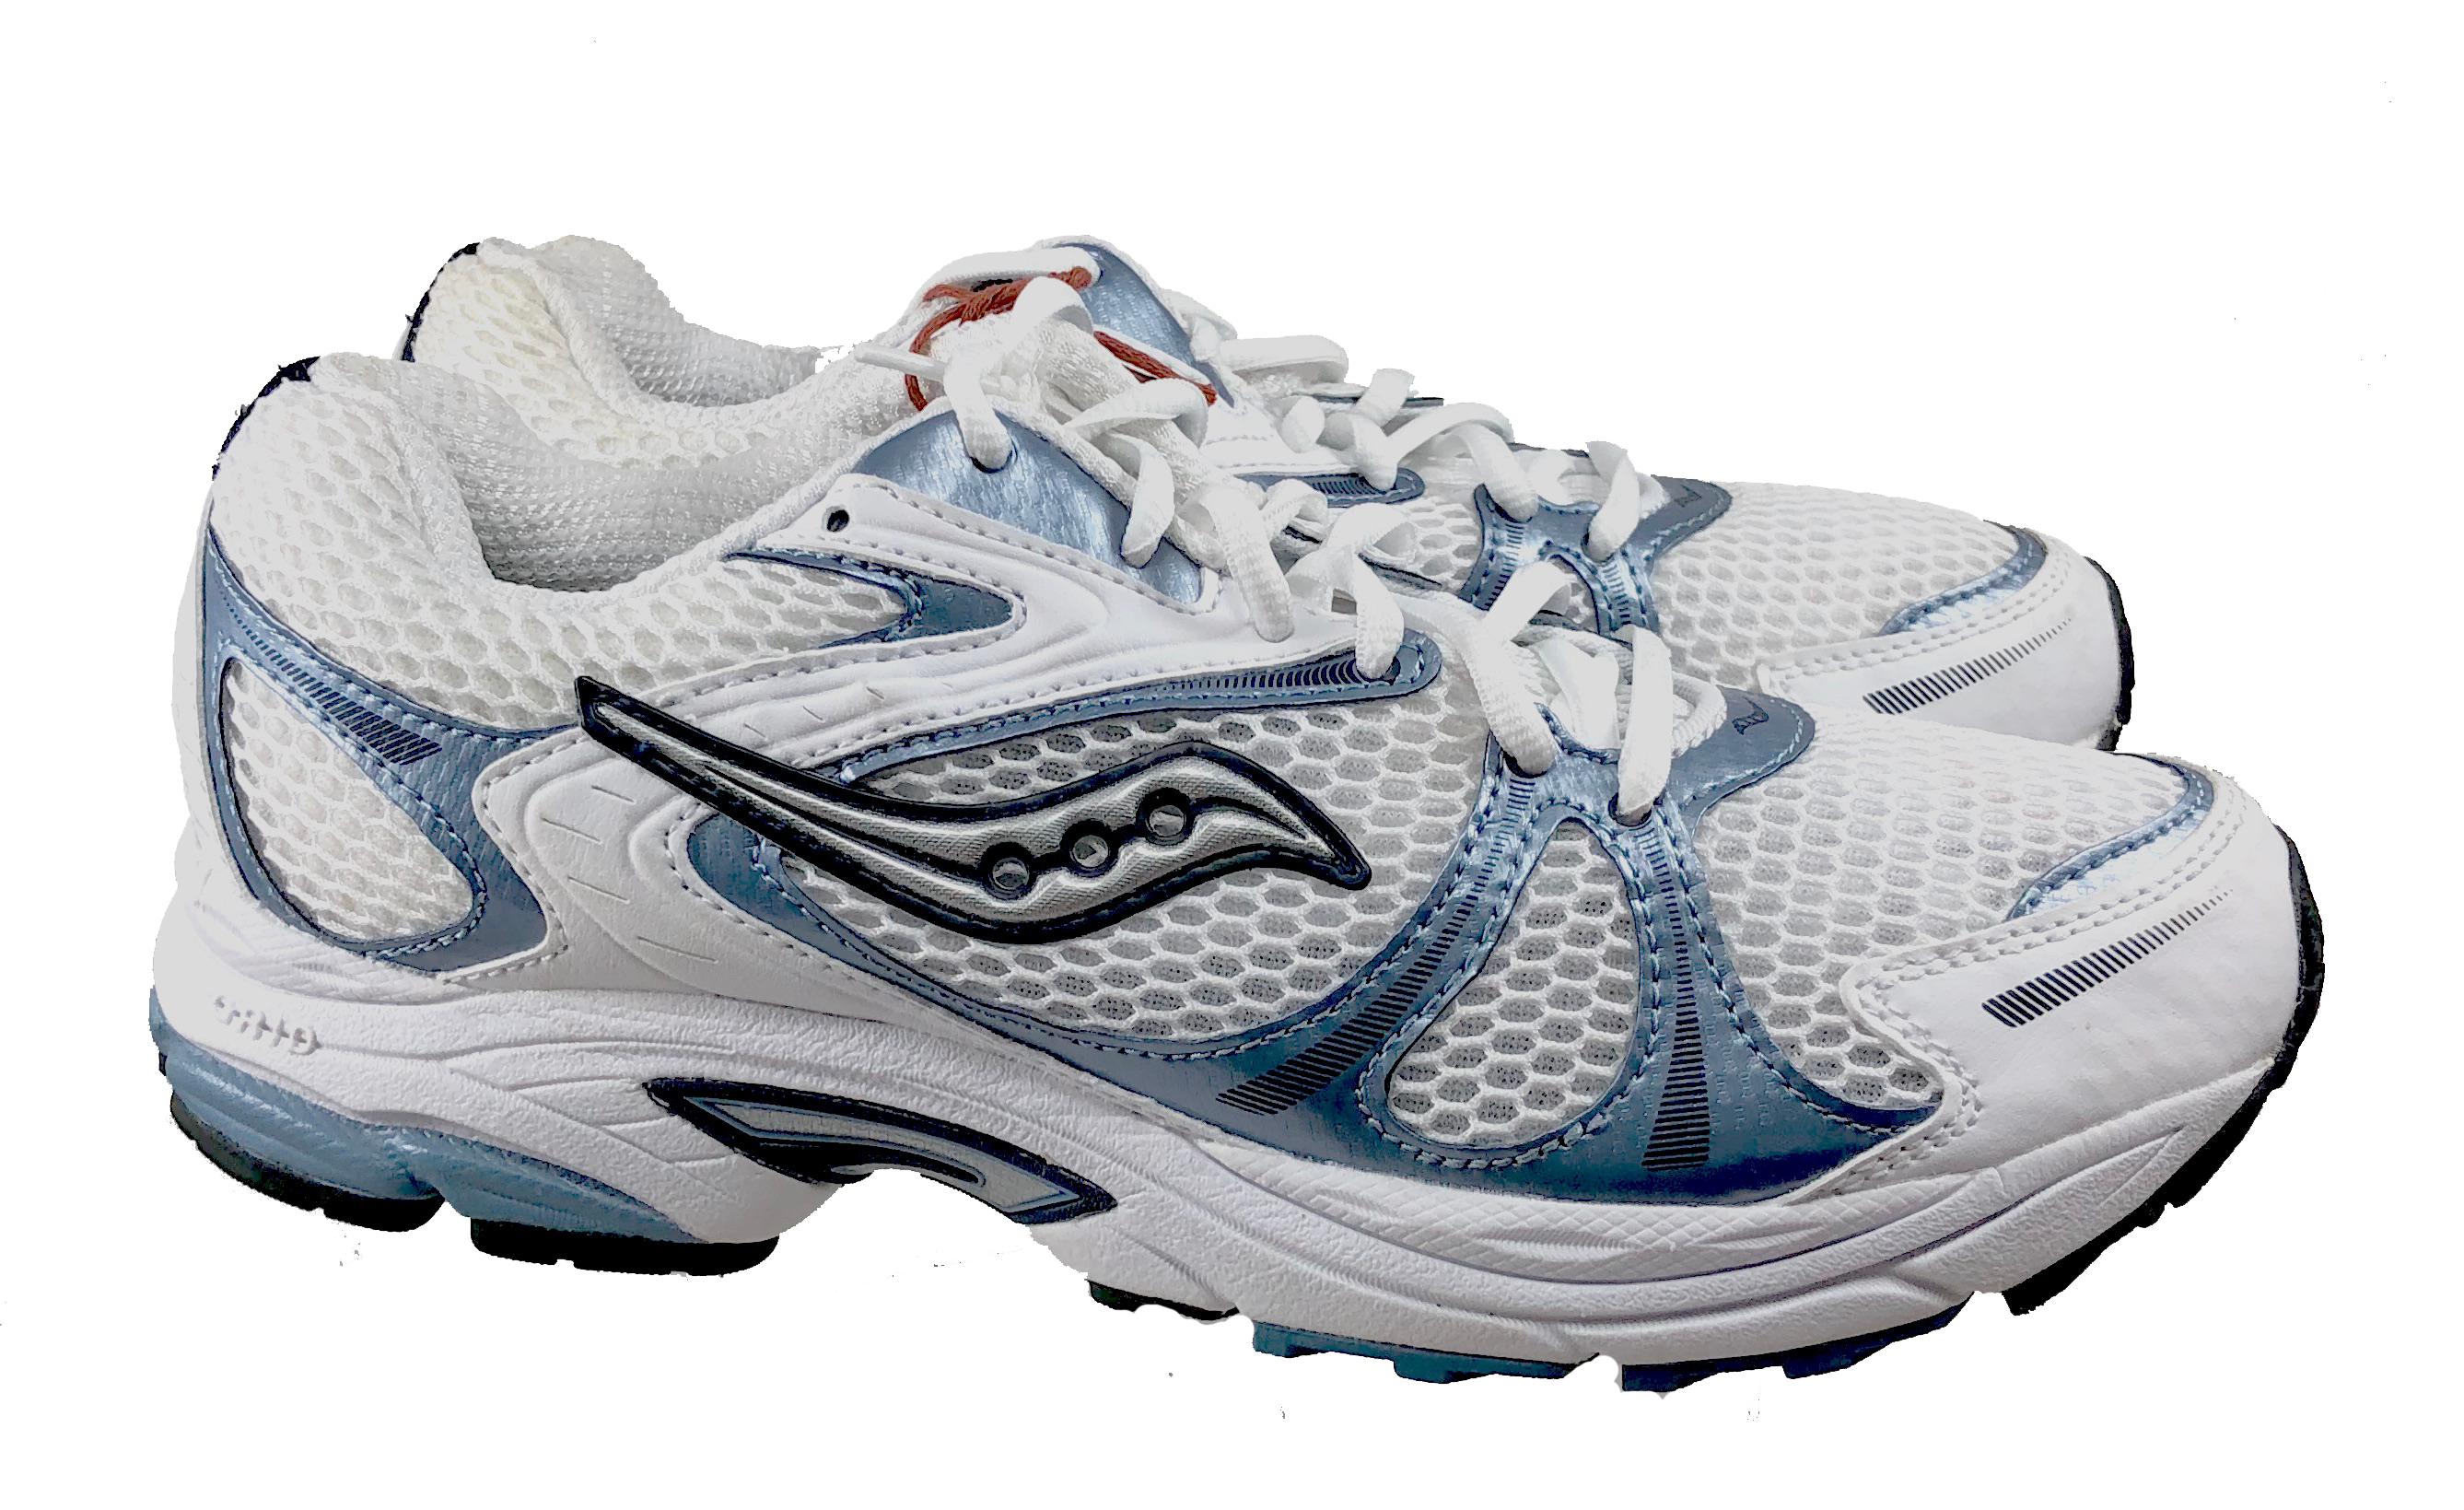 saucony grid womens running shoes